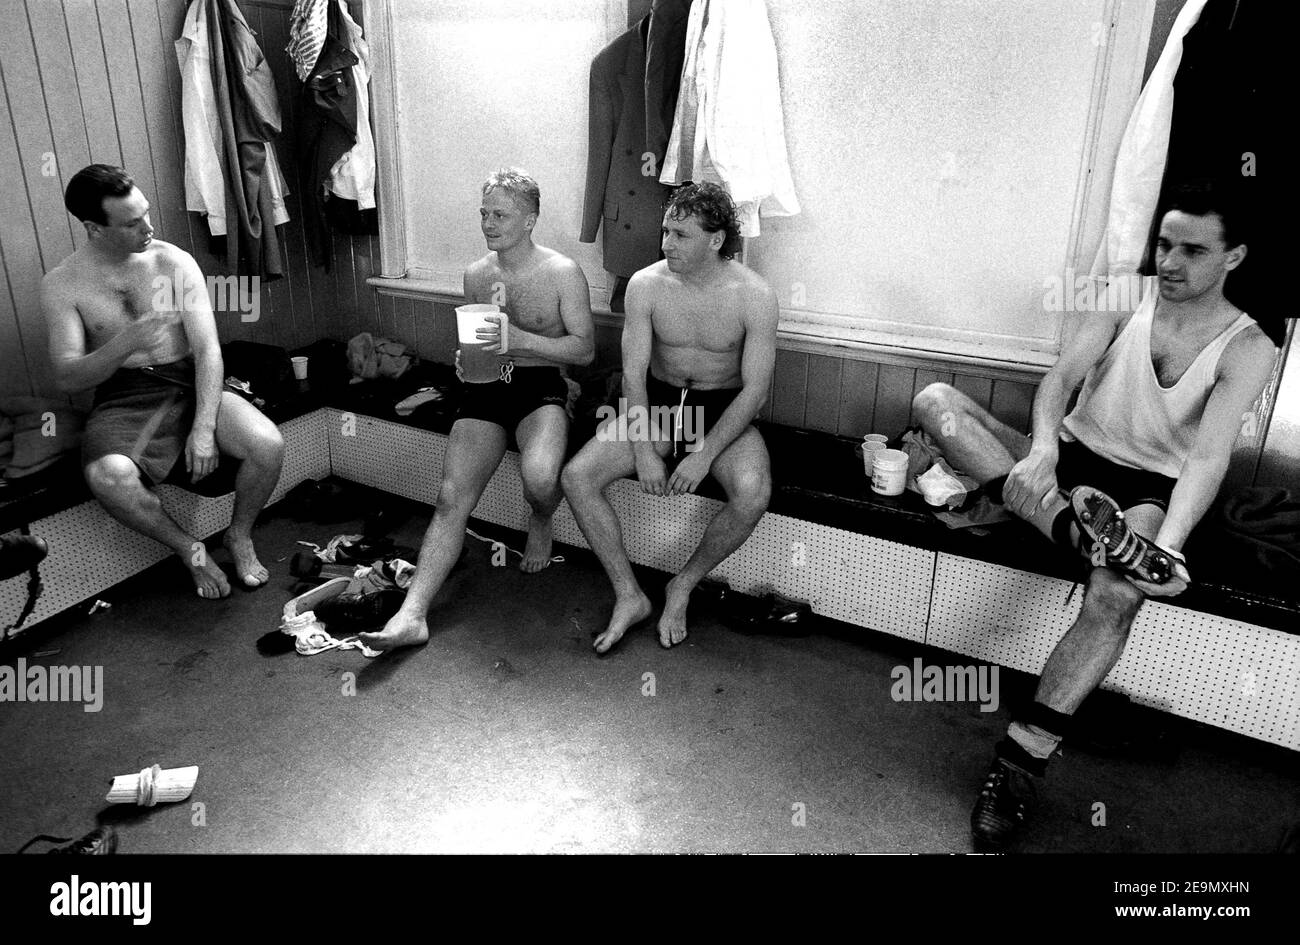 Wolverhampton Wanderers Football Club players in the old dressing room for the final time before the Molineux Stadium was redeveloped 11th May 1991. Colin Taylor, Keith Downing, Paul Birch, Paul Cook PICTURE BY DAVID BAGNALL Stock Photo